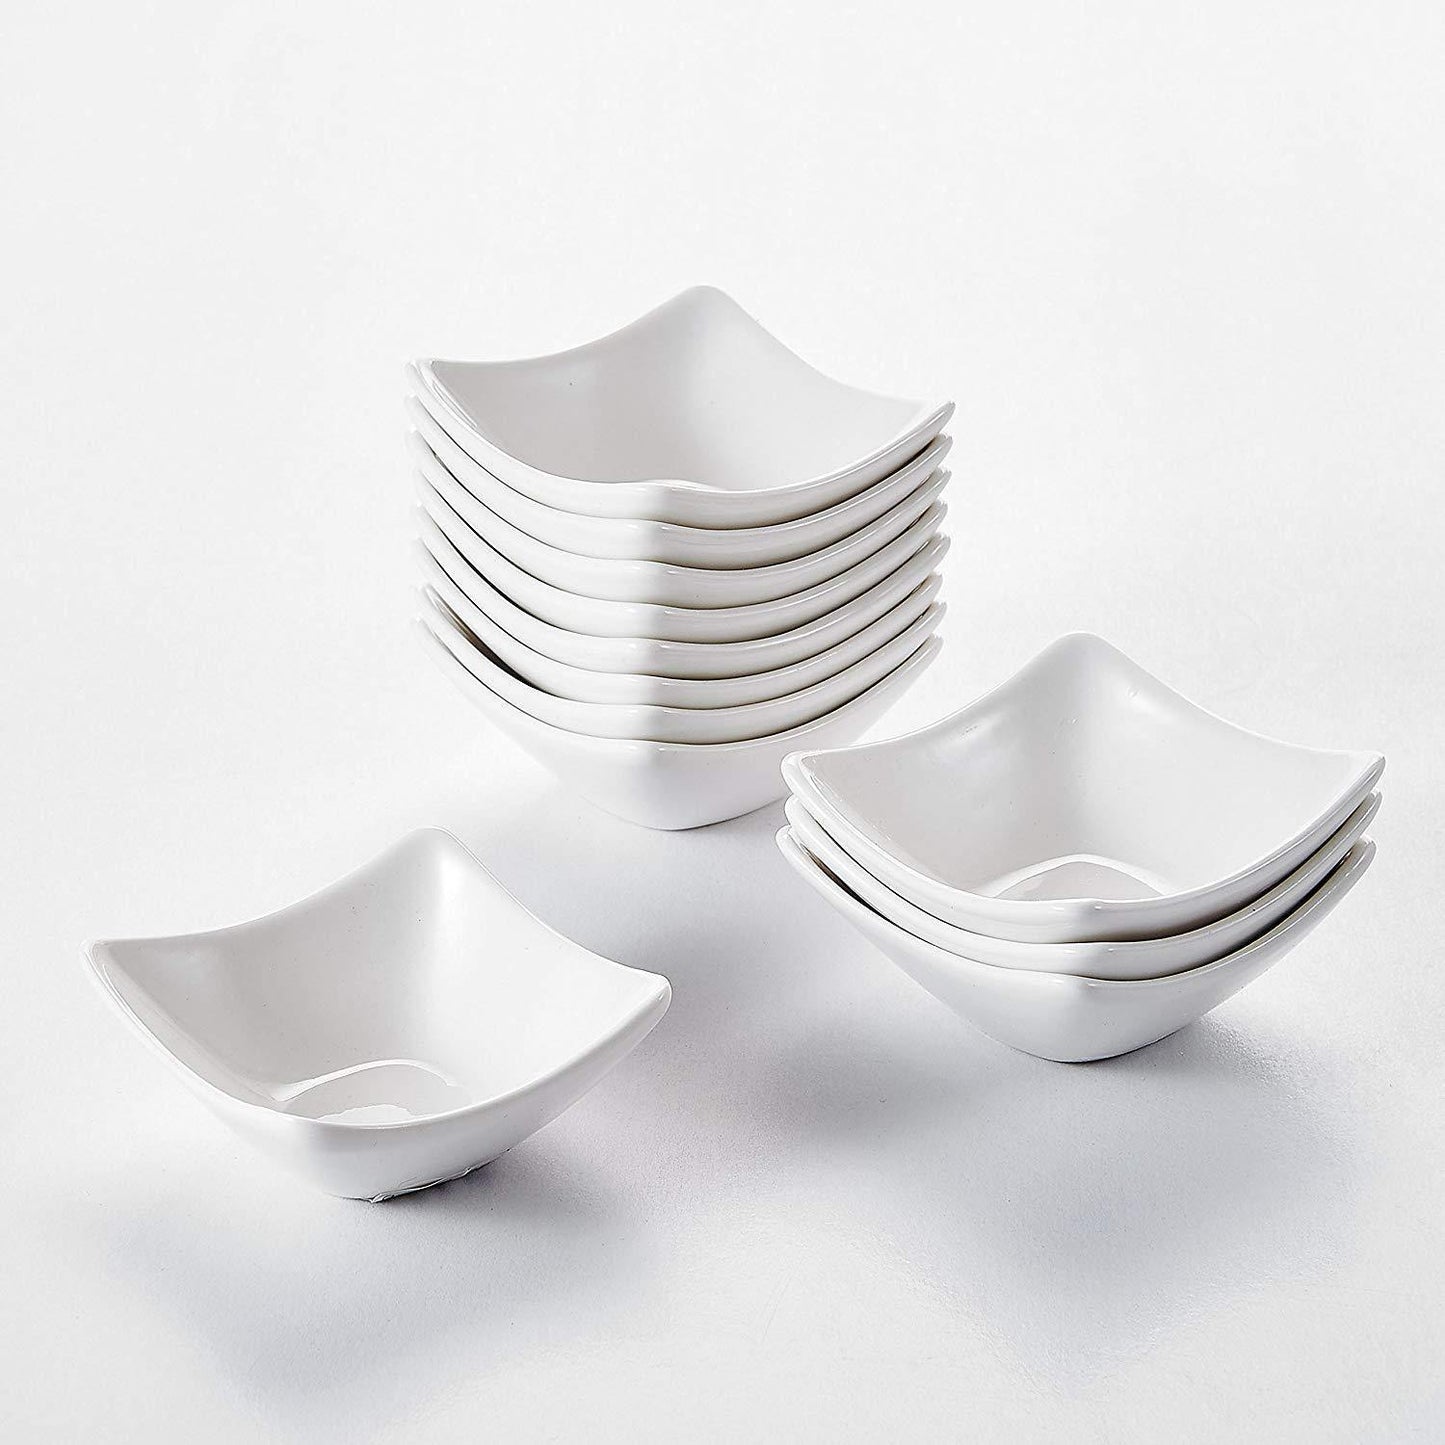 12-Piece White China Porcelain Ceramic Bowl (60 ml/ 3") - Nordic Side - 12, Bowl, Ceramic, Condiment, Cream, Dessert, Dipping, Dish, Dishes, for, Fruit, MALACASA, Ngredients, Piece, Porcelain